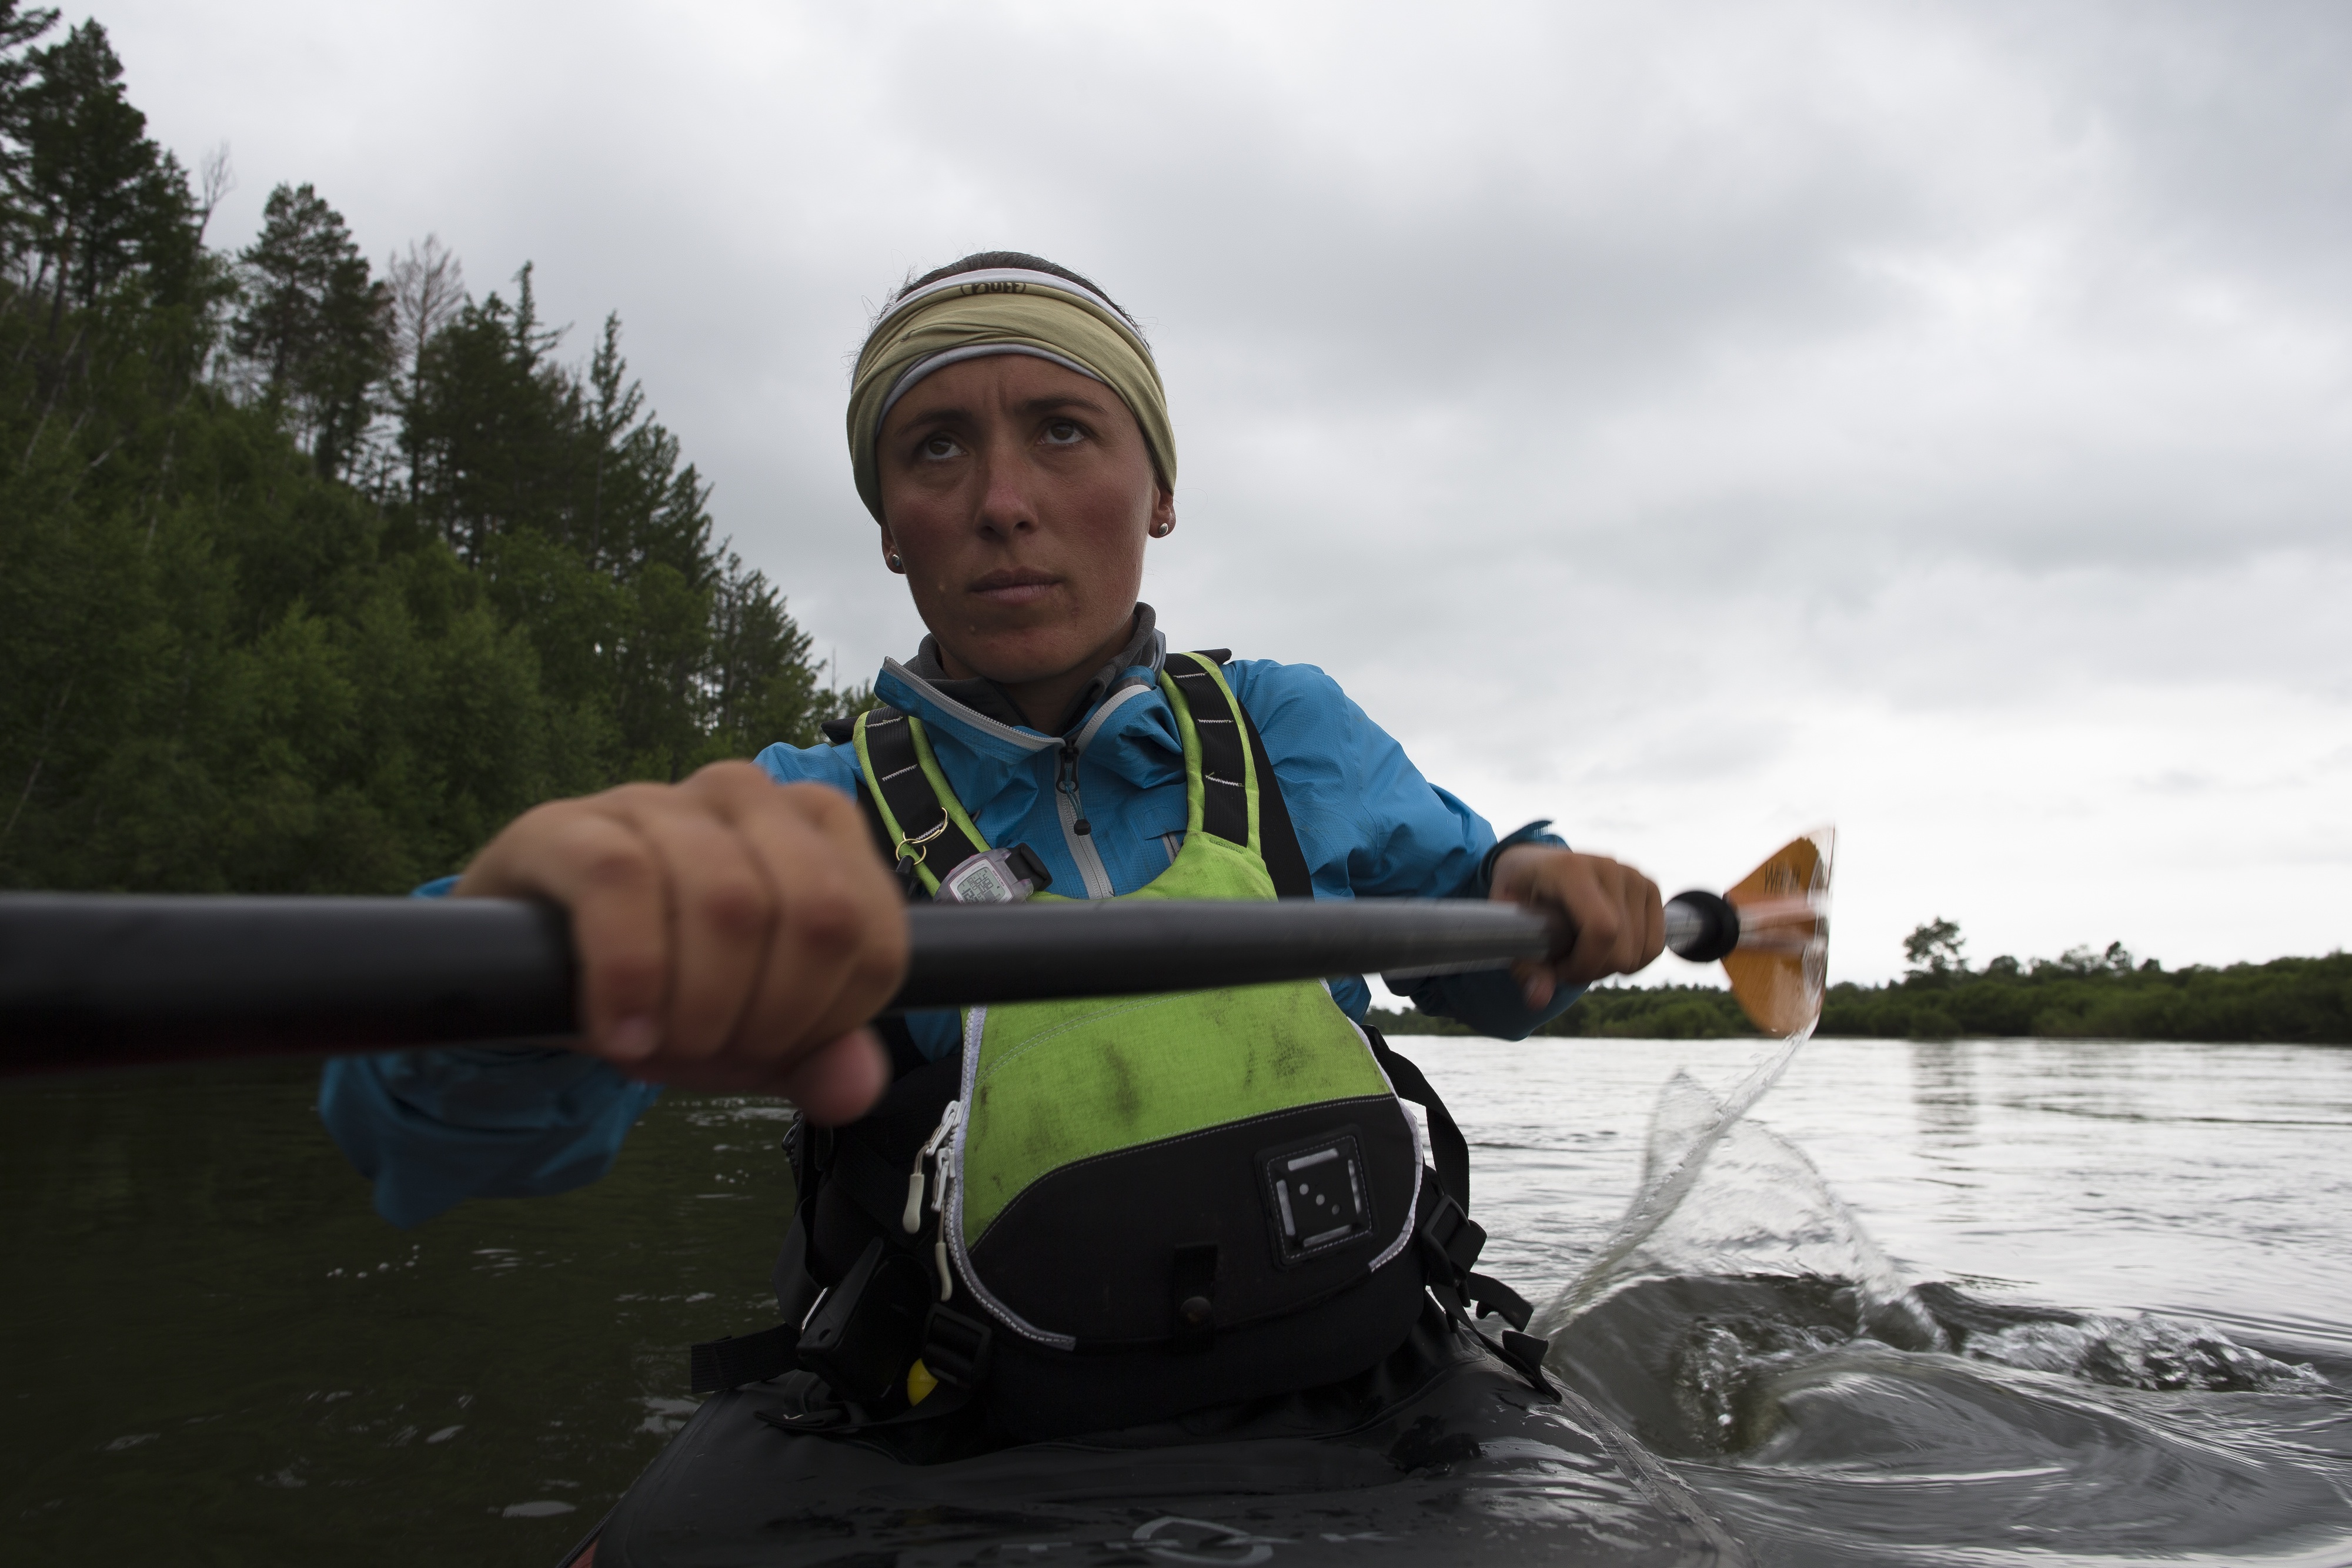 Krystle Wright paddles the Onon River lower section. This is the final day on the Onon River before the team take out just 20km from the Russian border and will rejoin the river in Russia as it becomes the Amur River.